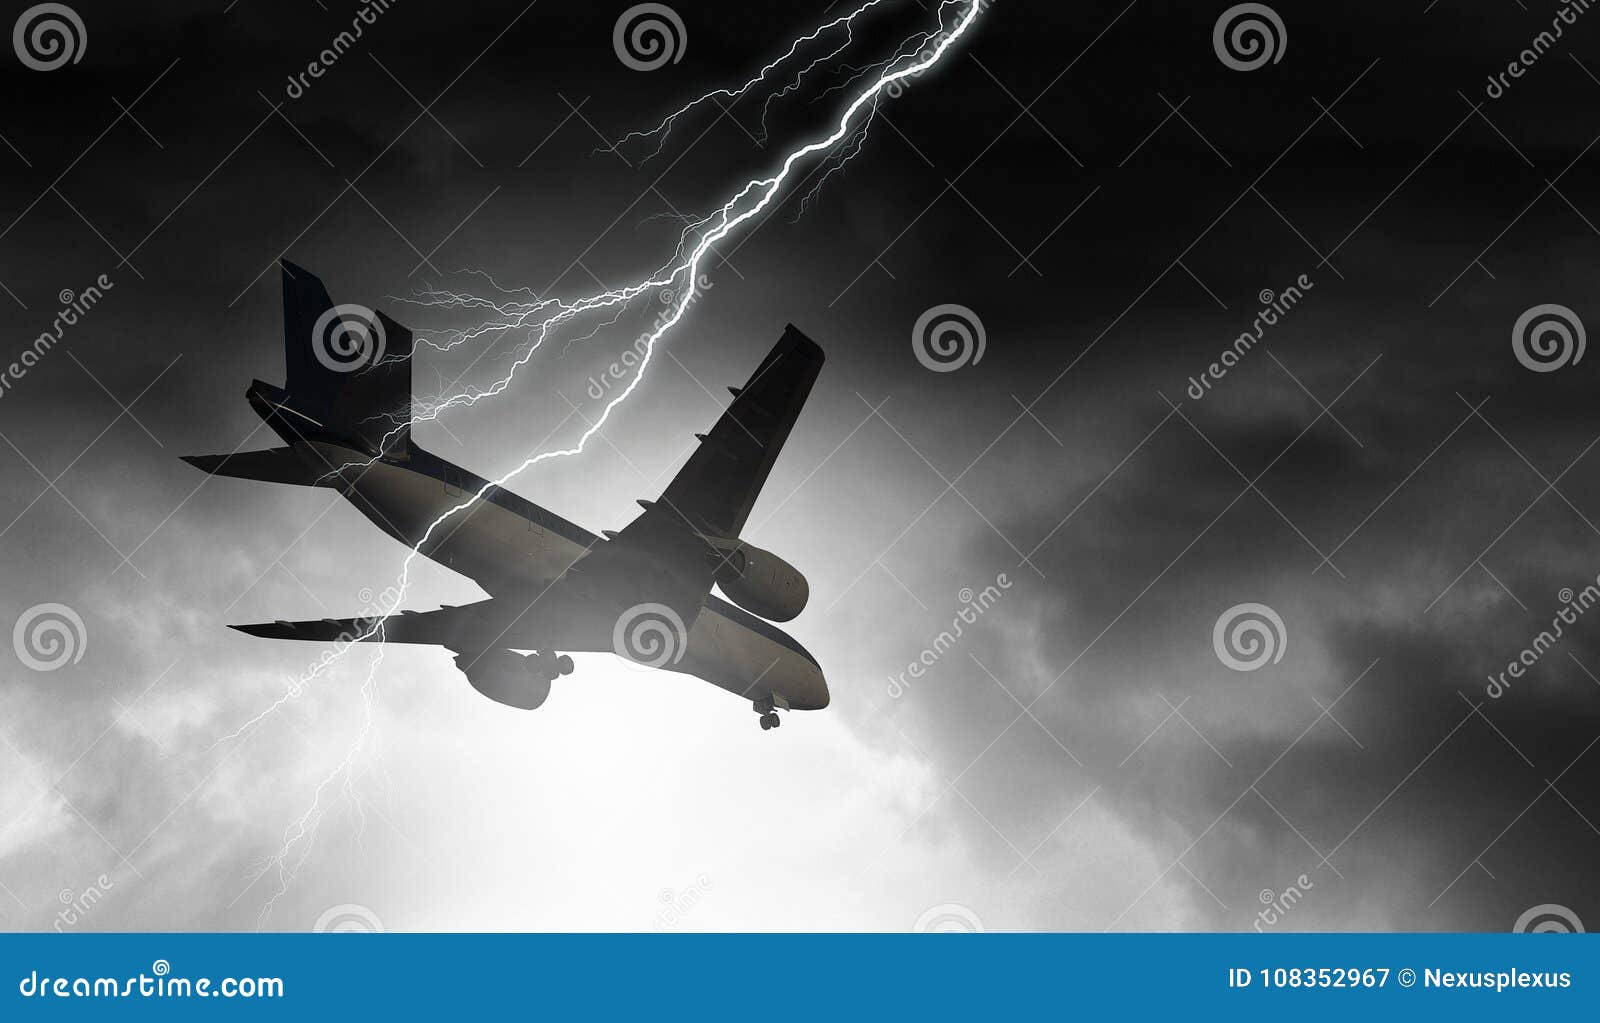 Airplane Accident. Mixed Stock - Image of lightning, departures: 108352967